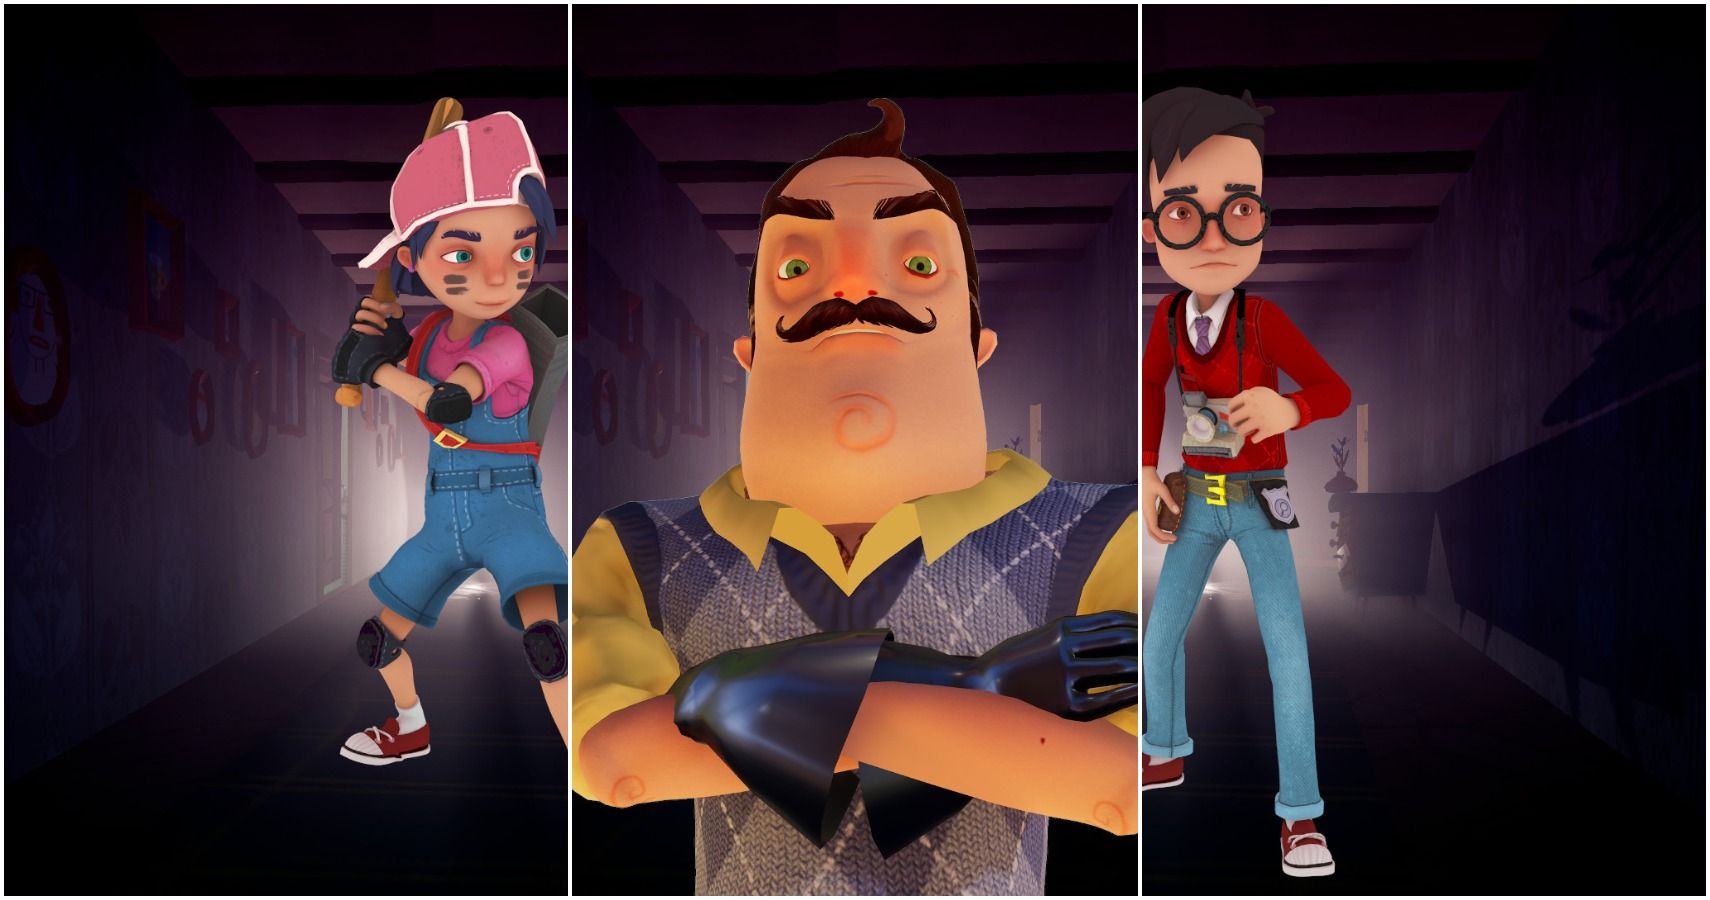 Secret Neighbor: Every Character Ranked By Ability